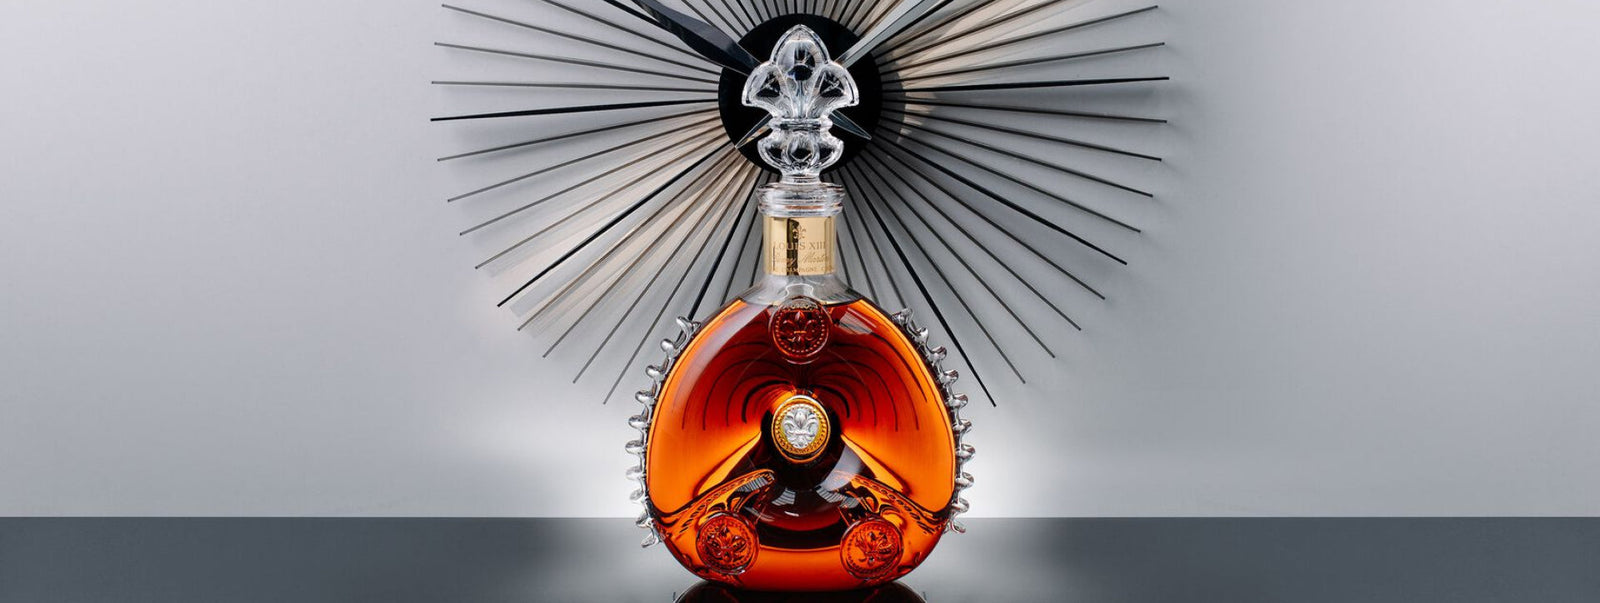 A lifestyle photo of LOUIS XIII decanter on a black surface, black modern clock behind